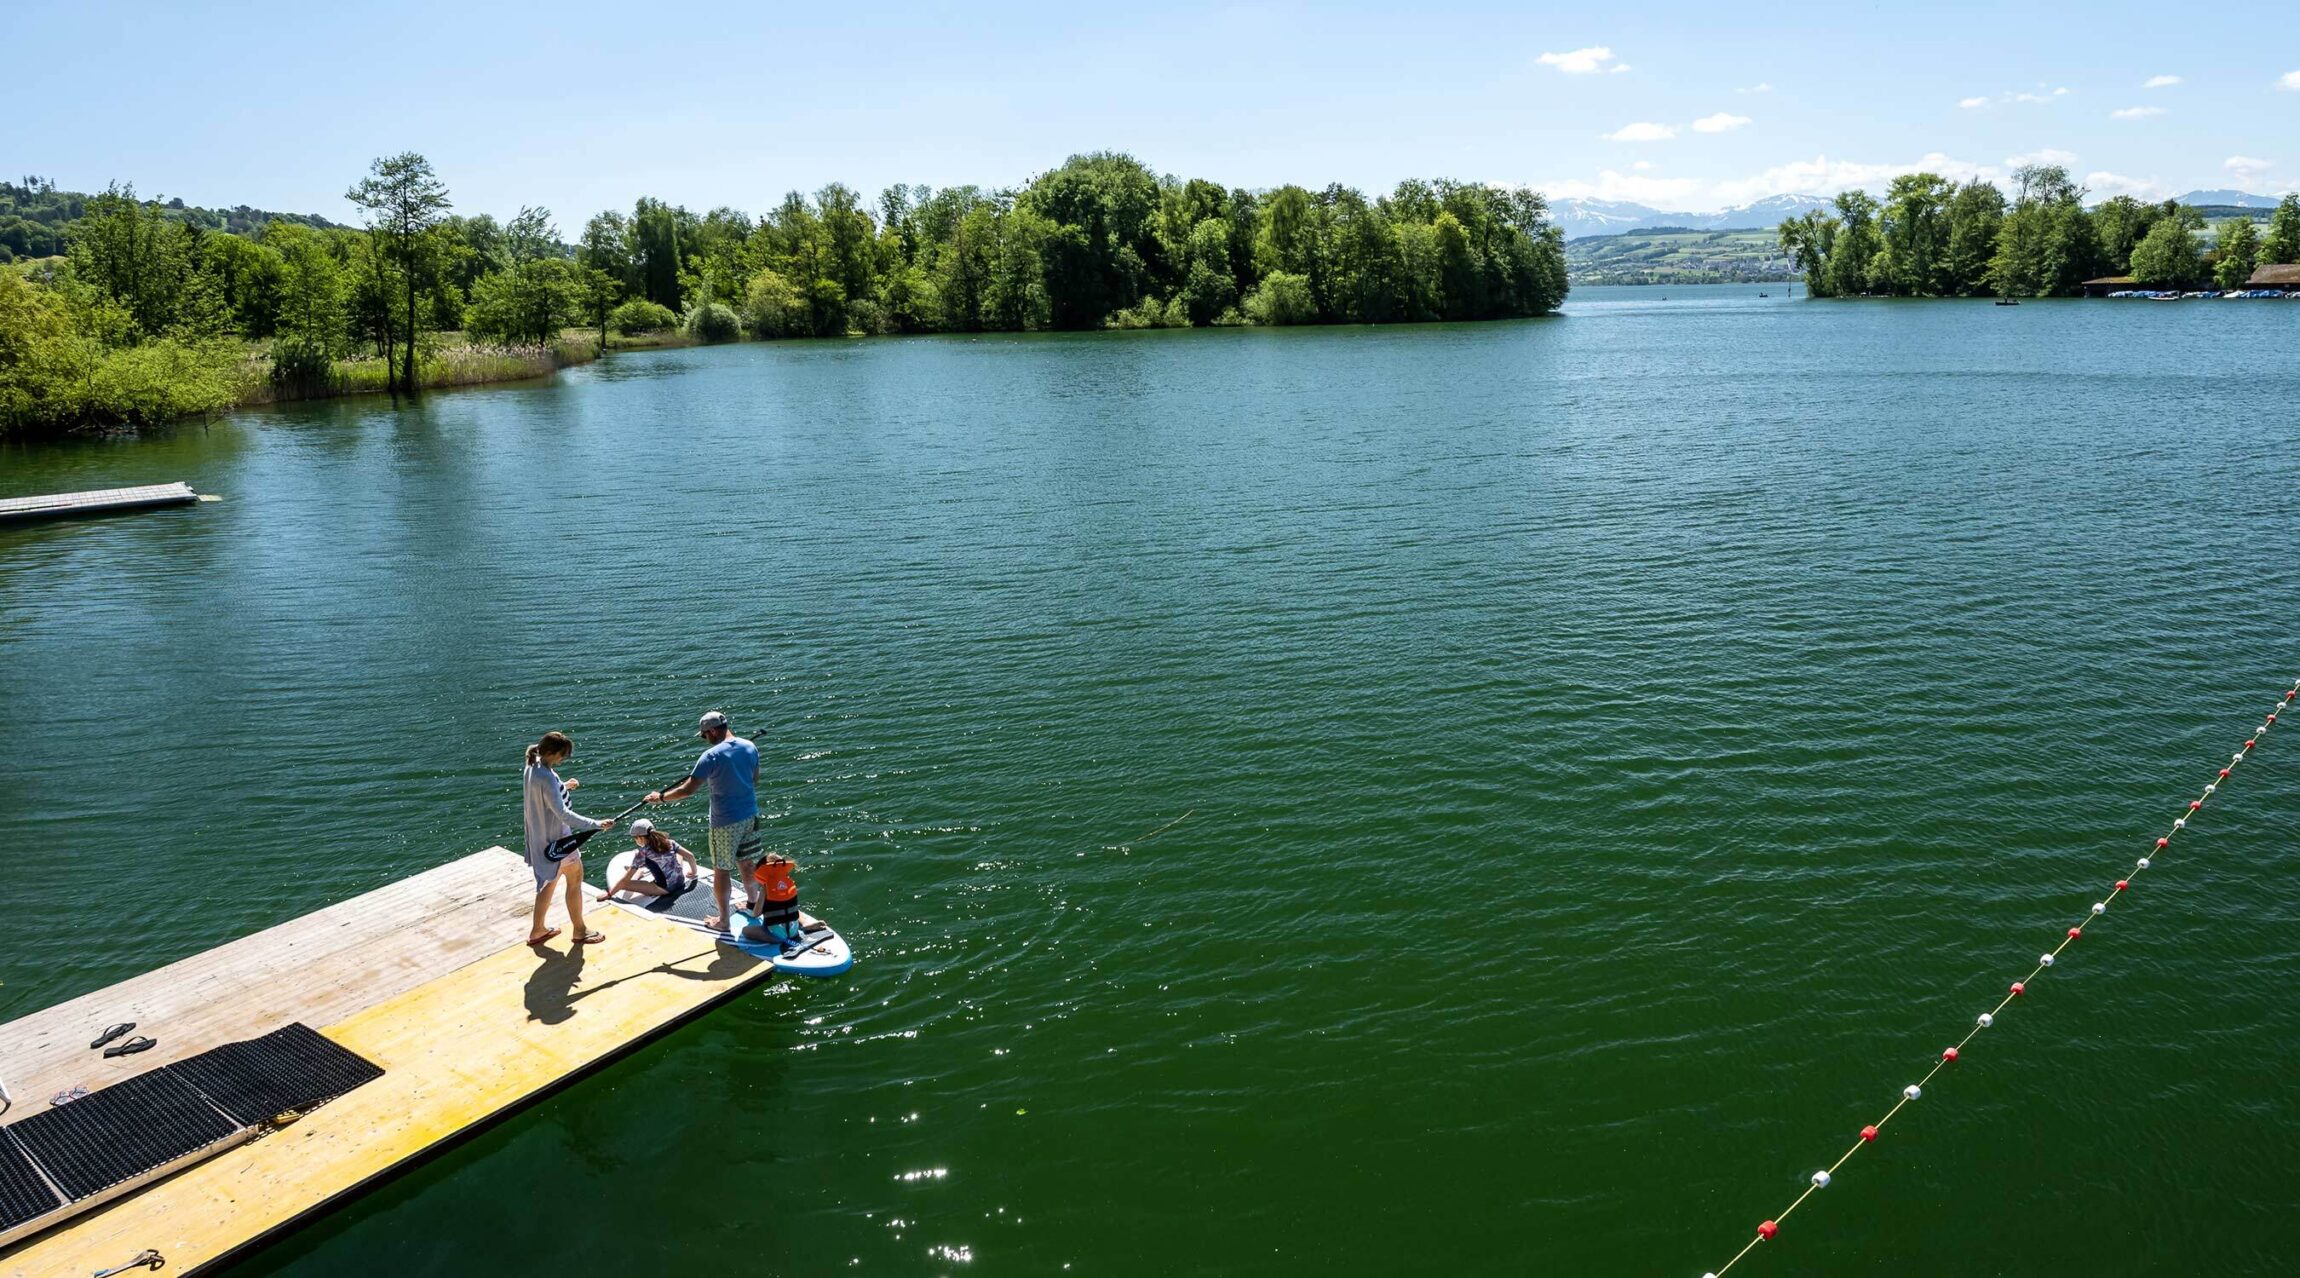 Lake Sempach – a local recreation area with many options